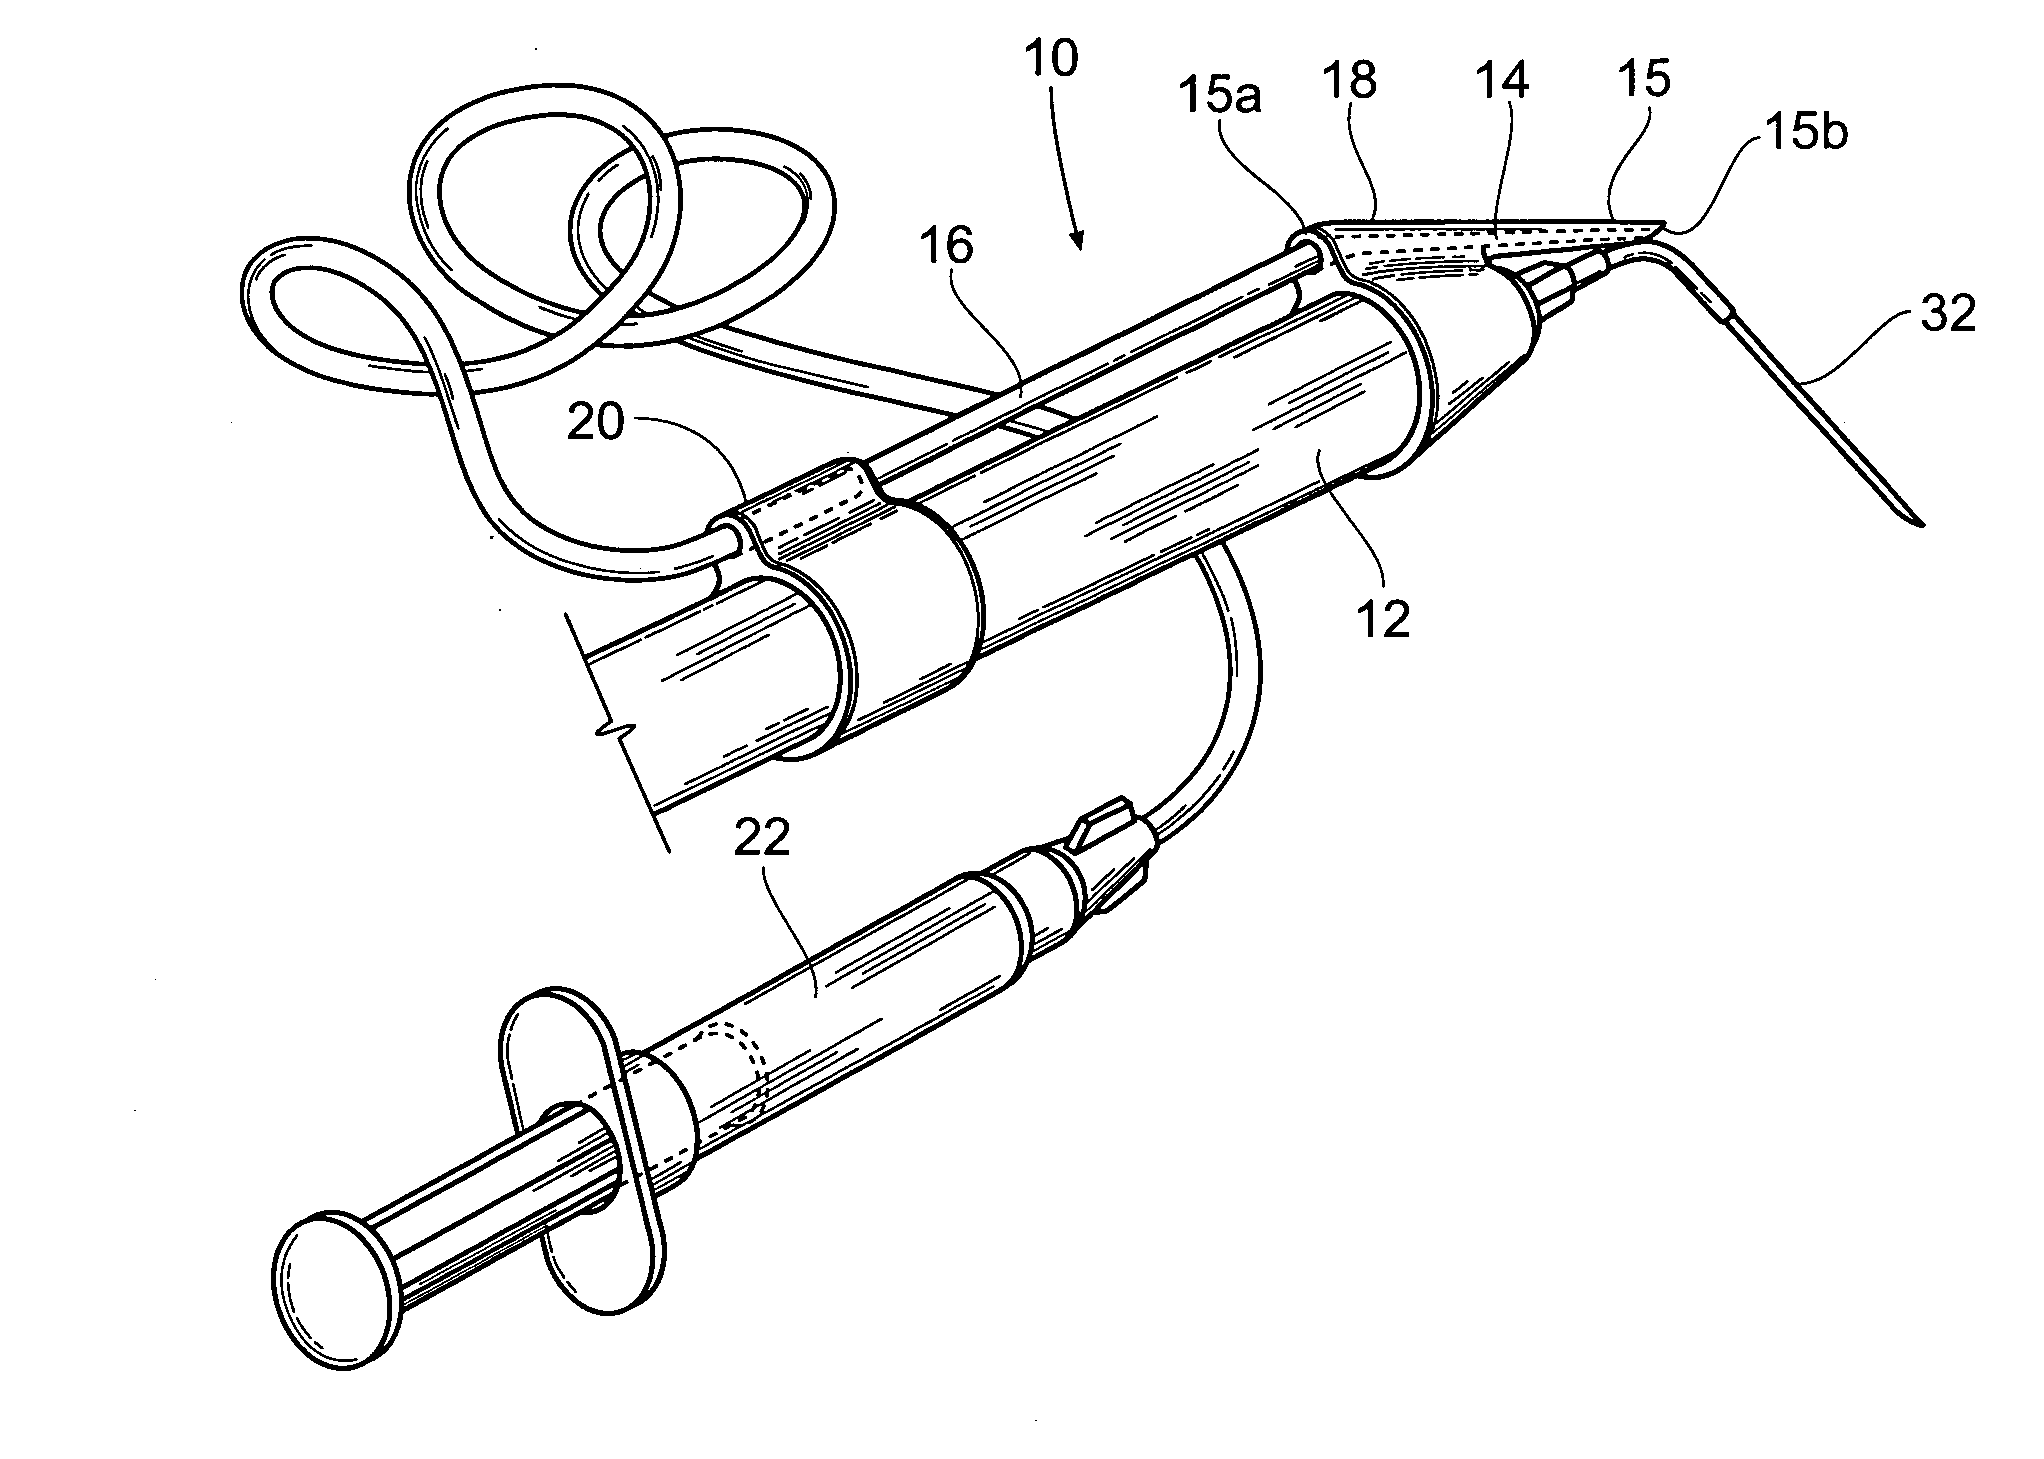 Fluid bypass device for handheld dental devices